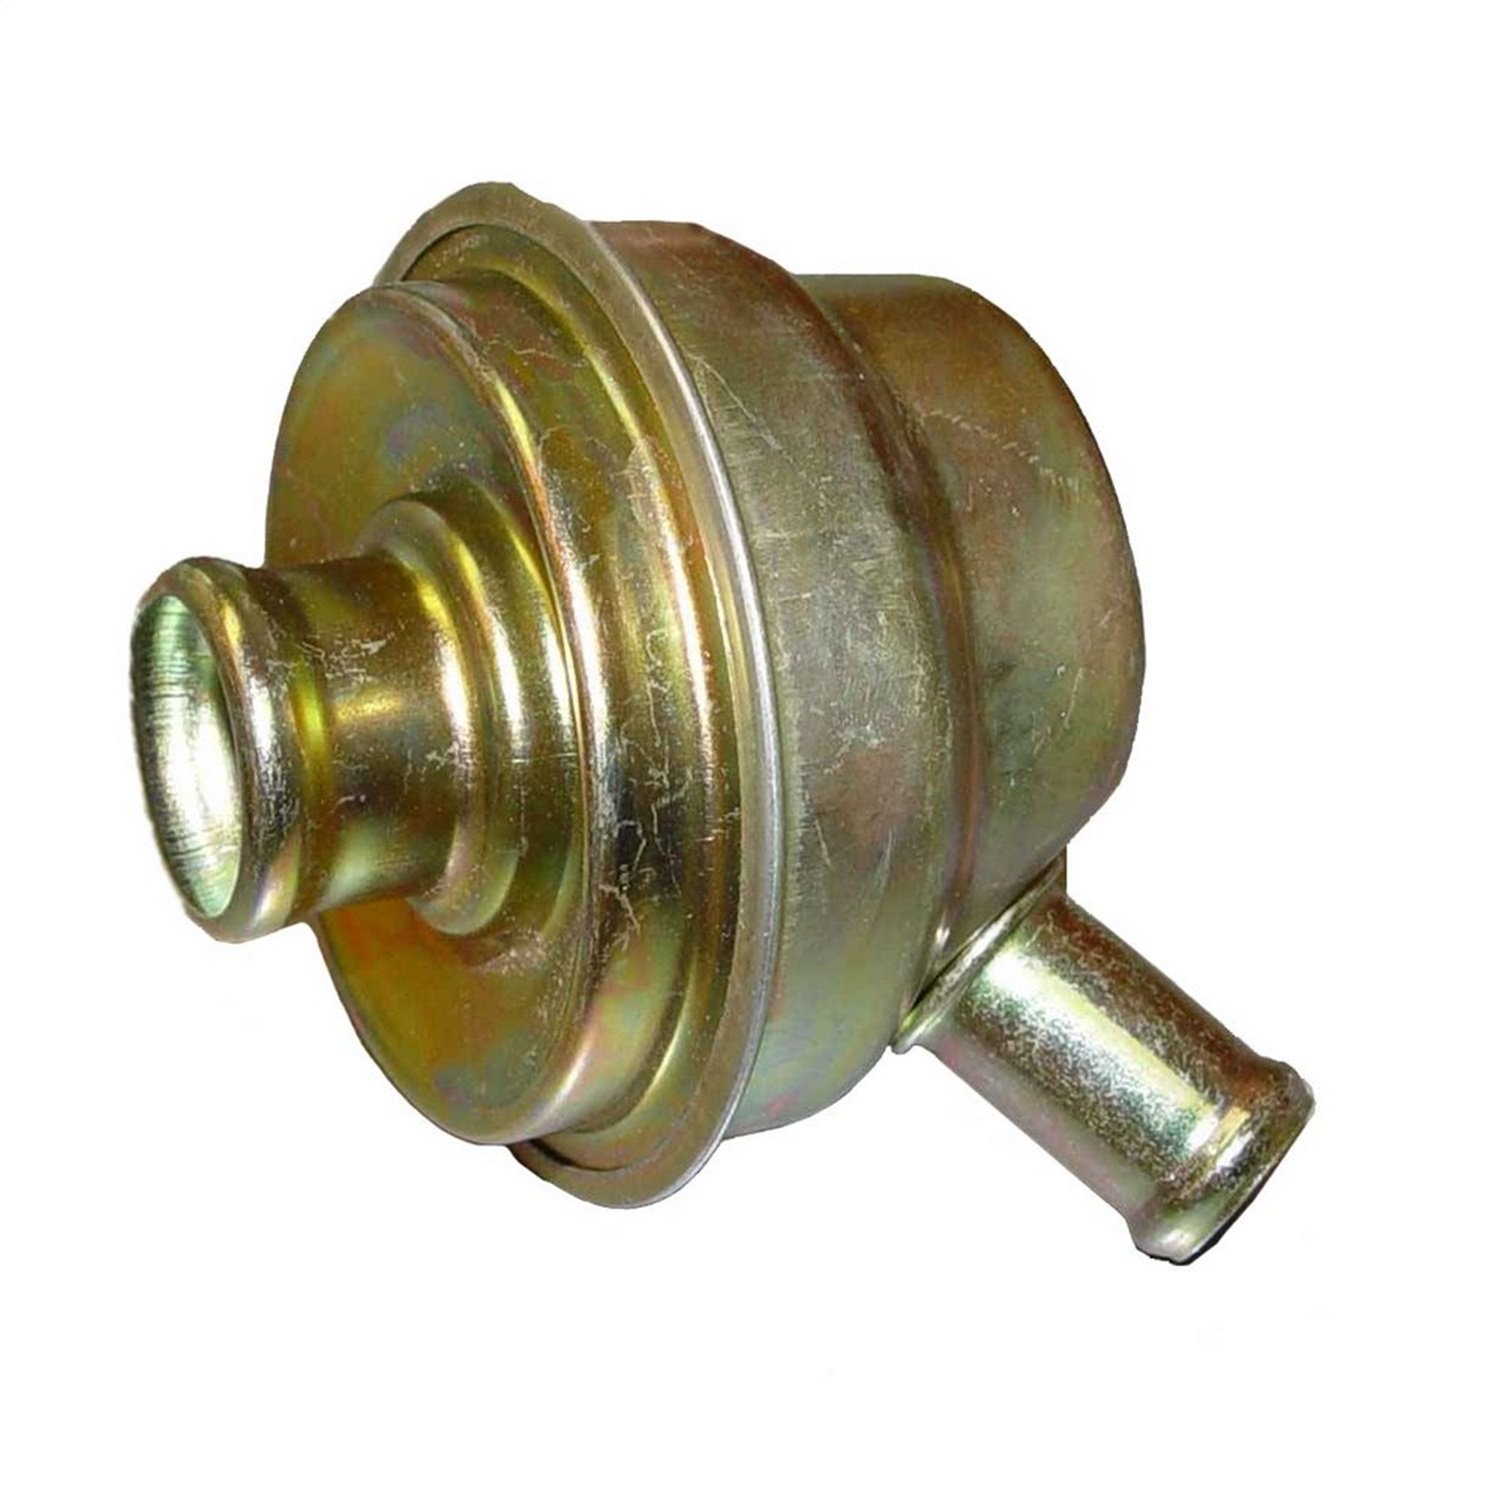 Replacement crankcase vent from Omix-ADA, Fits 93-98 Jeep Grand Cherokee ZJ with 5.2 liter or 5.9 liter V8 engines.